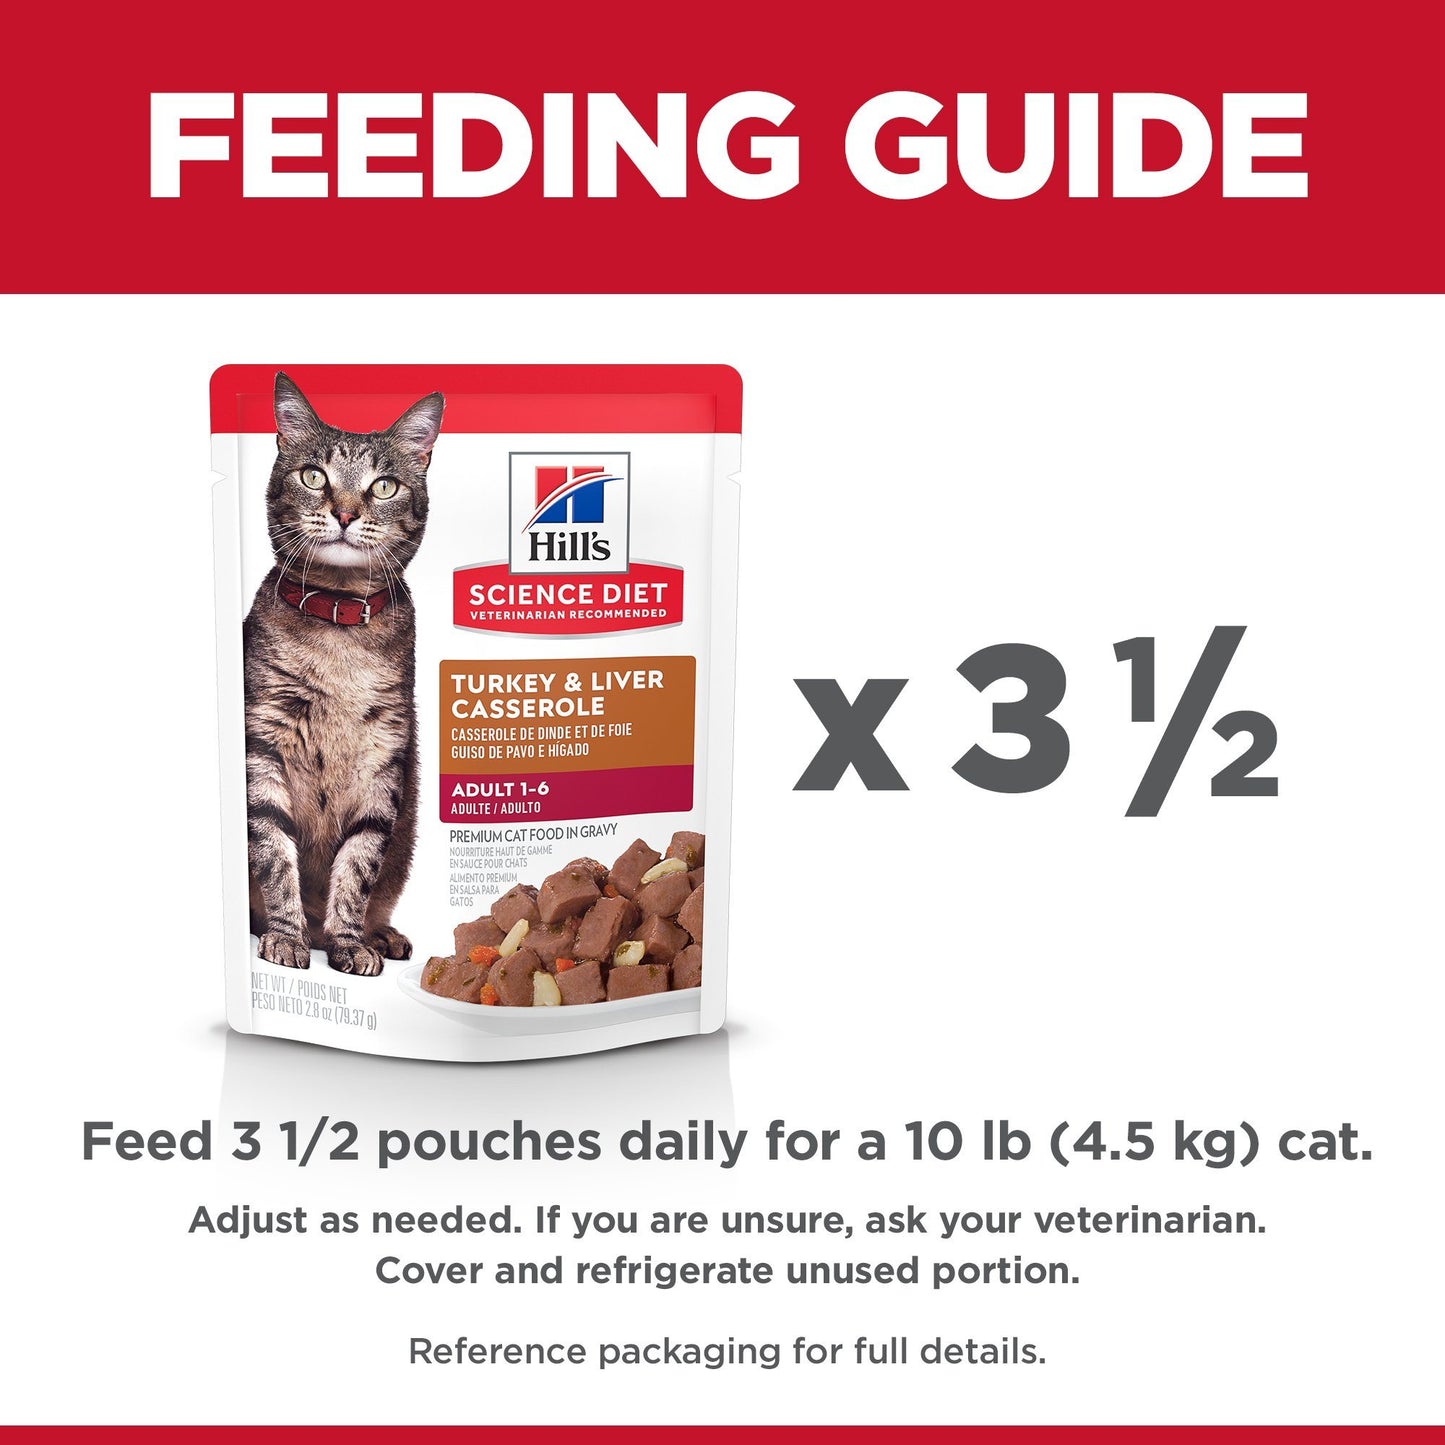 Hill's Science Diet Adult Wet Cat Food, Turkey & Liver, 79g pouch  Canned Cat Food  | PetMax Canada